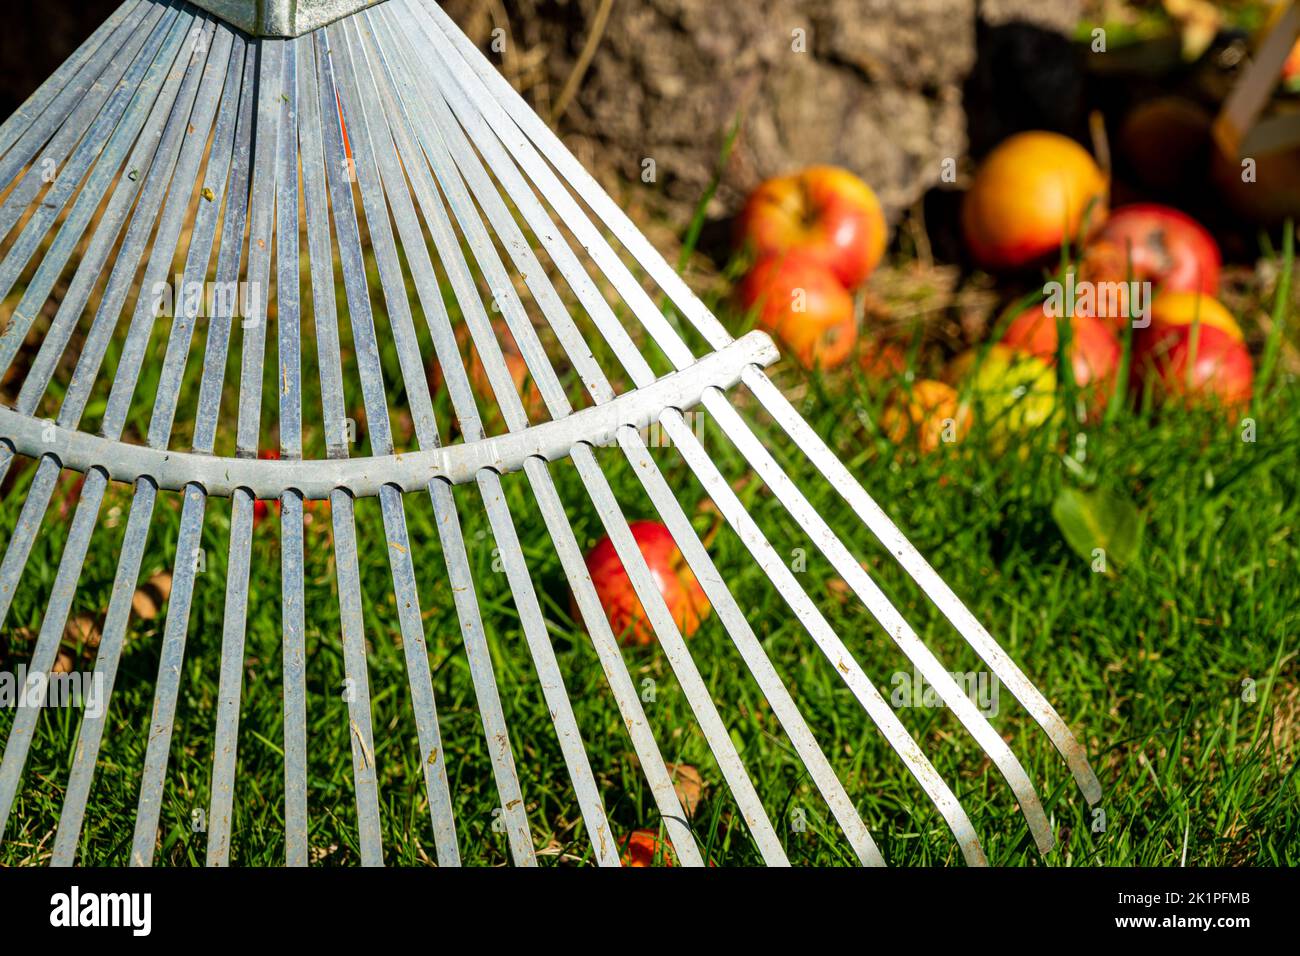 Harvesting fallen apples with a leaf rake Stock Photo